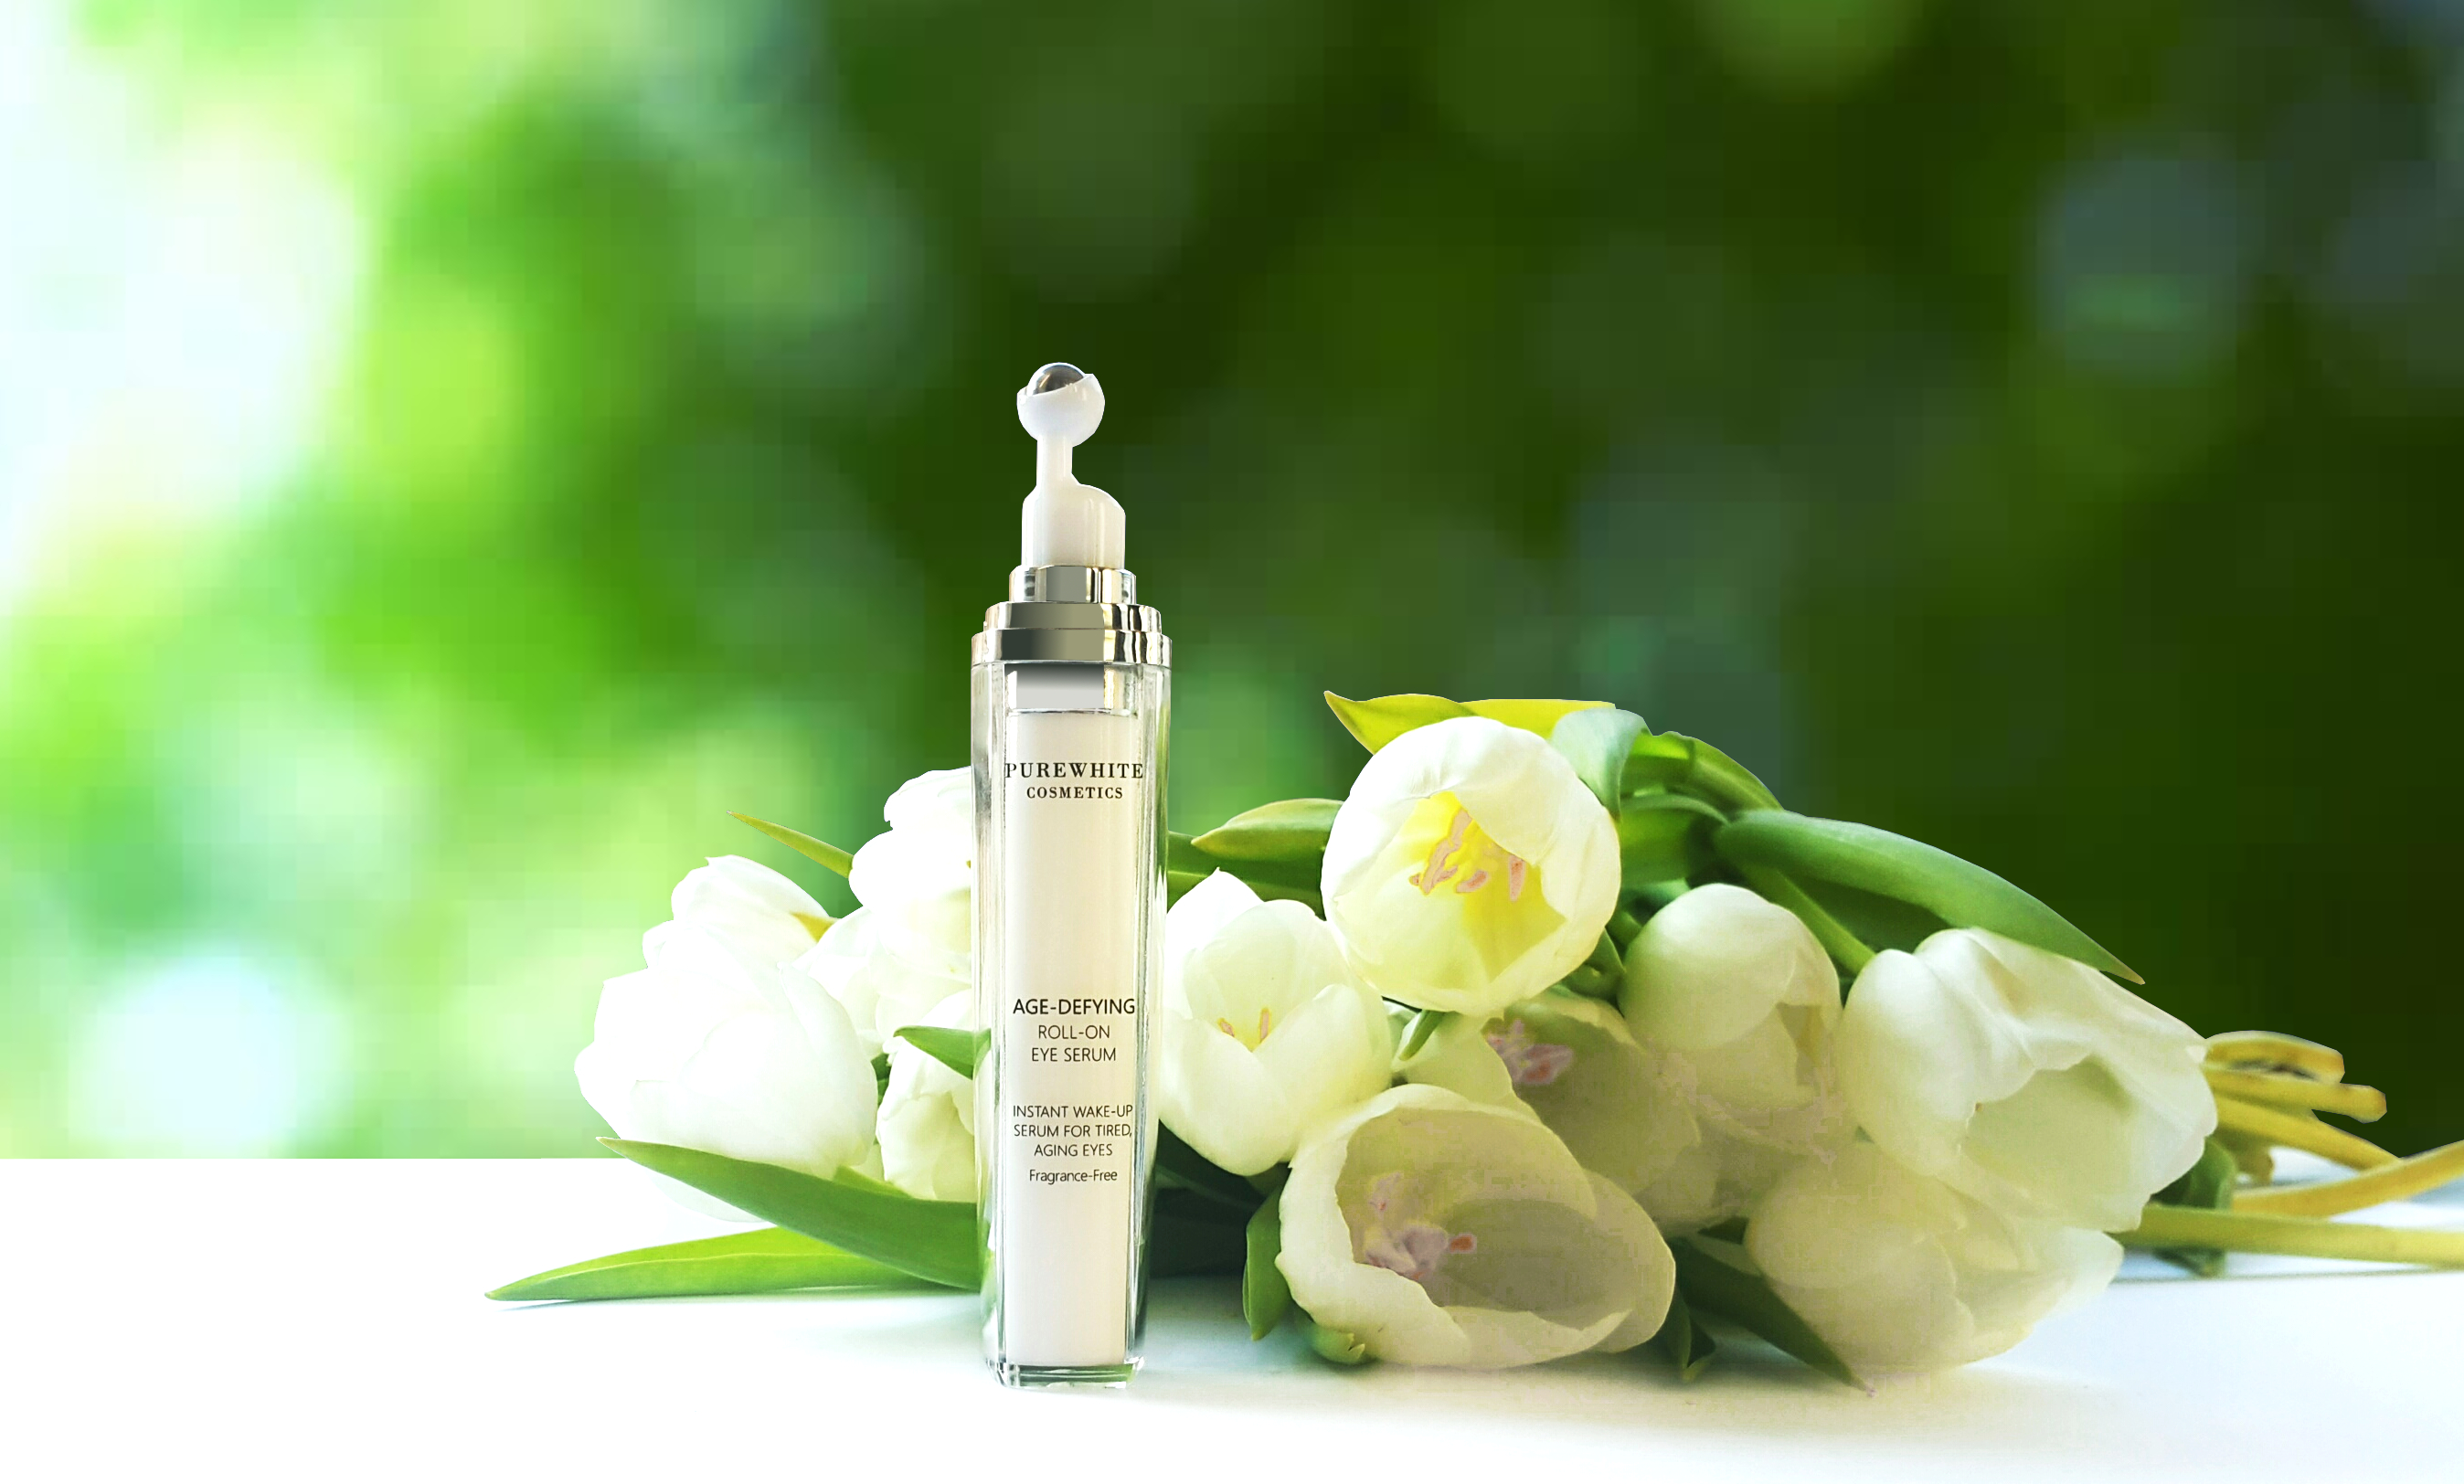 Pure White Cosmetics - Introducing NEW Age-Defying Roll-on Eye Serum